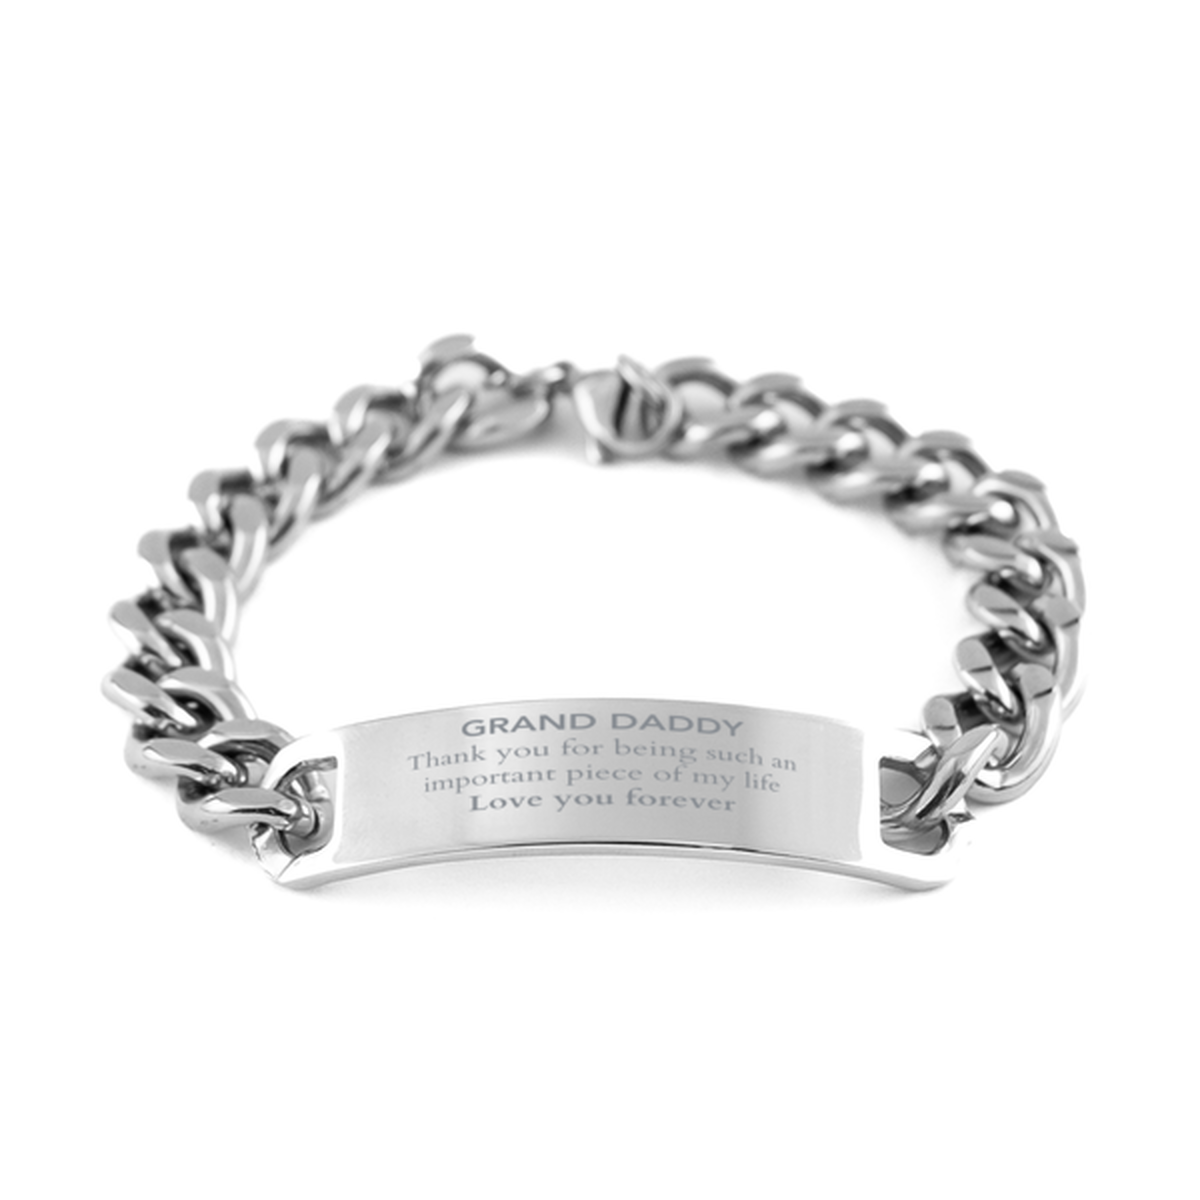 Appropriate Grand Daddy Cuban Chain Stainless Steel Bracelet Epic Birthday Gifts for Grand Daddy Thank you for being such an important piece of my life Grand Daddy Christmas Mothers Fathers Day